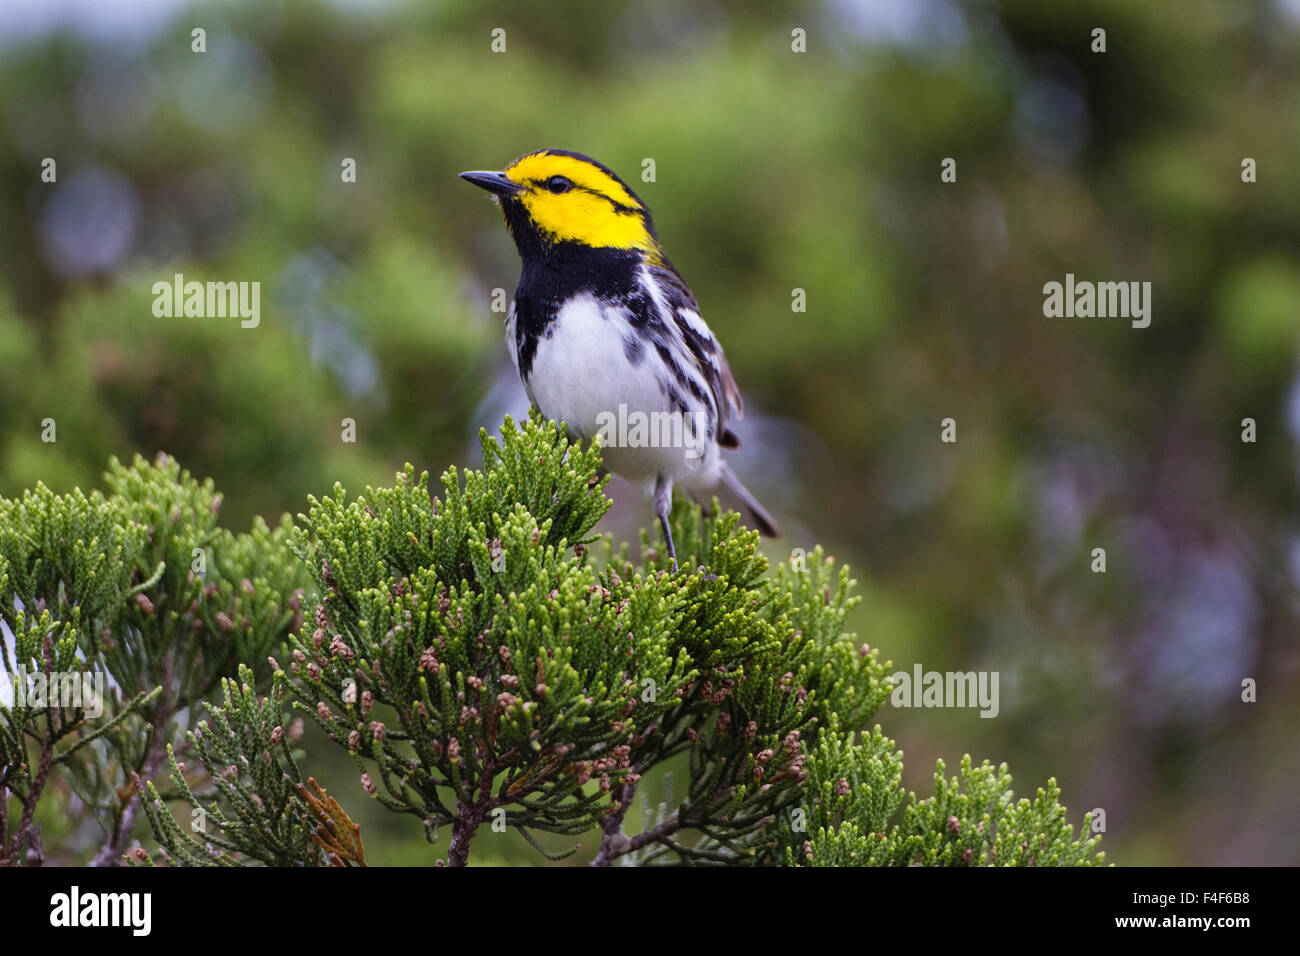 Kinney County, Texas. Golden-cheeked Warbler (Dendroica chrysoparia) on breeding territory in juniper thicket Stock Photo